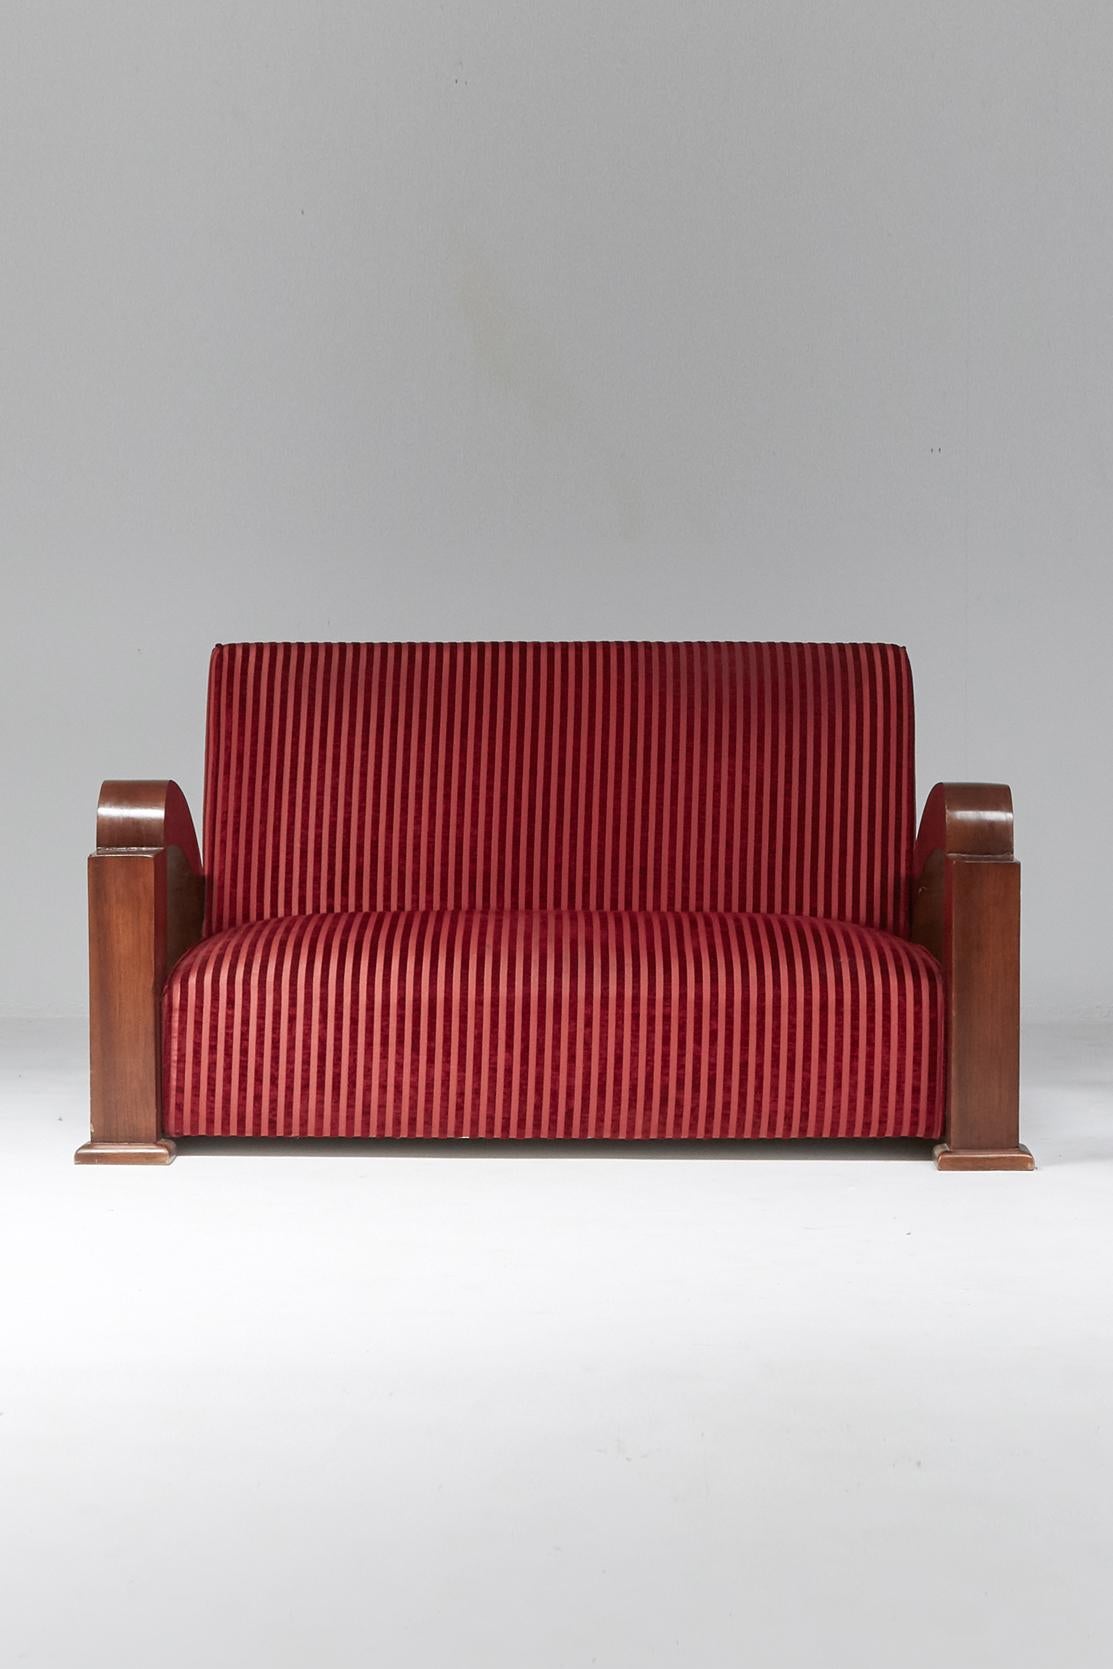 French Art Deco Sofa in Red Striped Velvet and with Swoosh Armrests 4